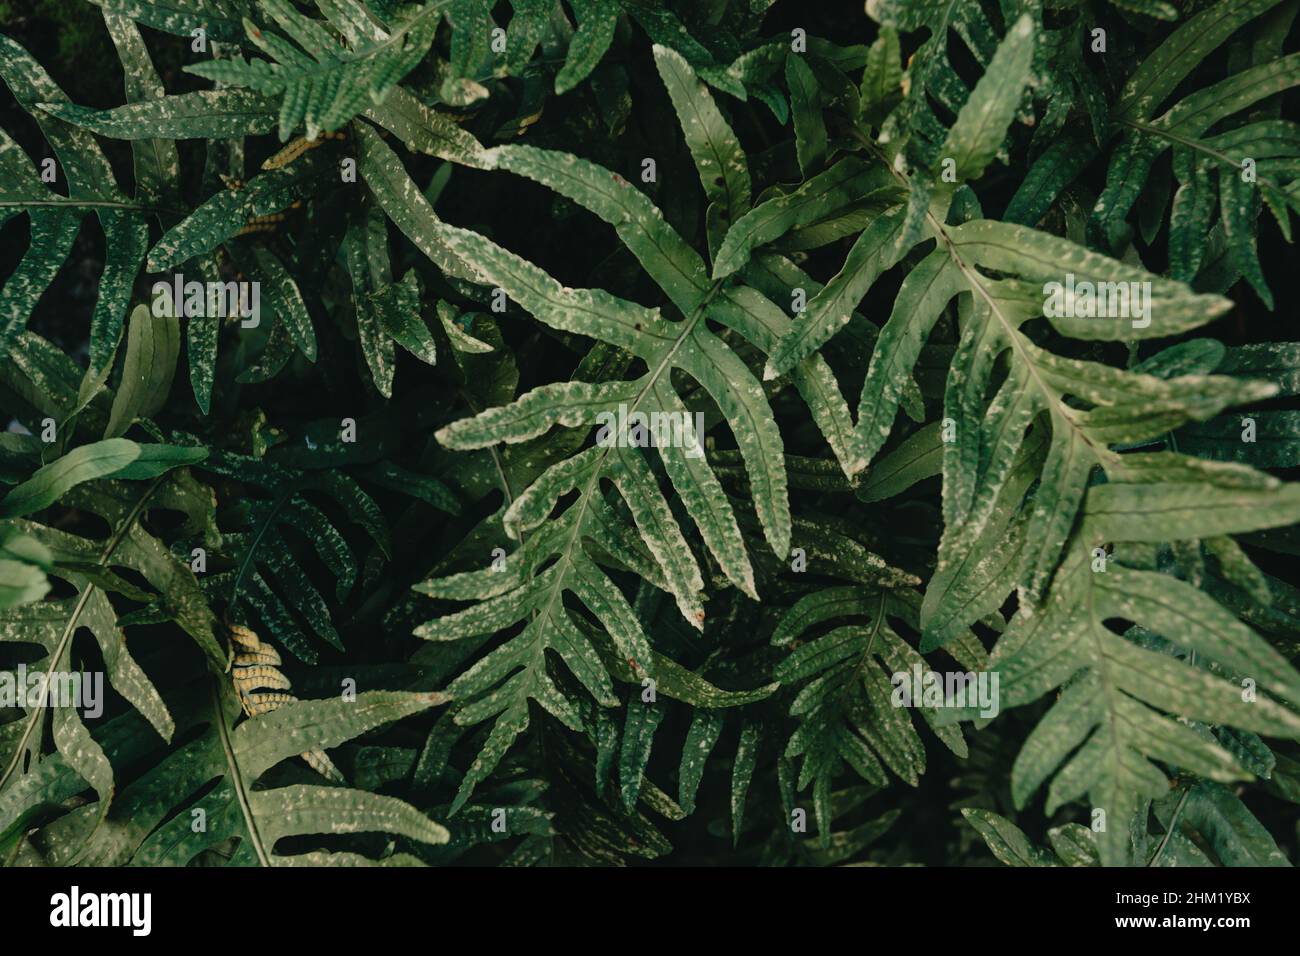 A close up of some green plants with super texture and deep shadows with copy space Stock Photo